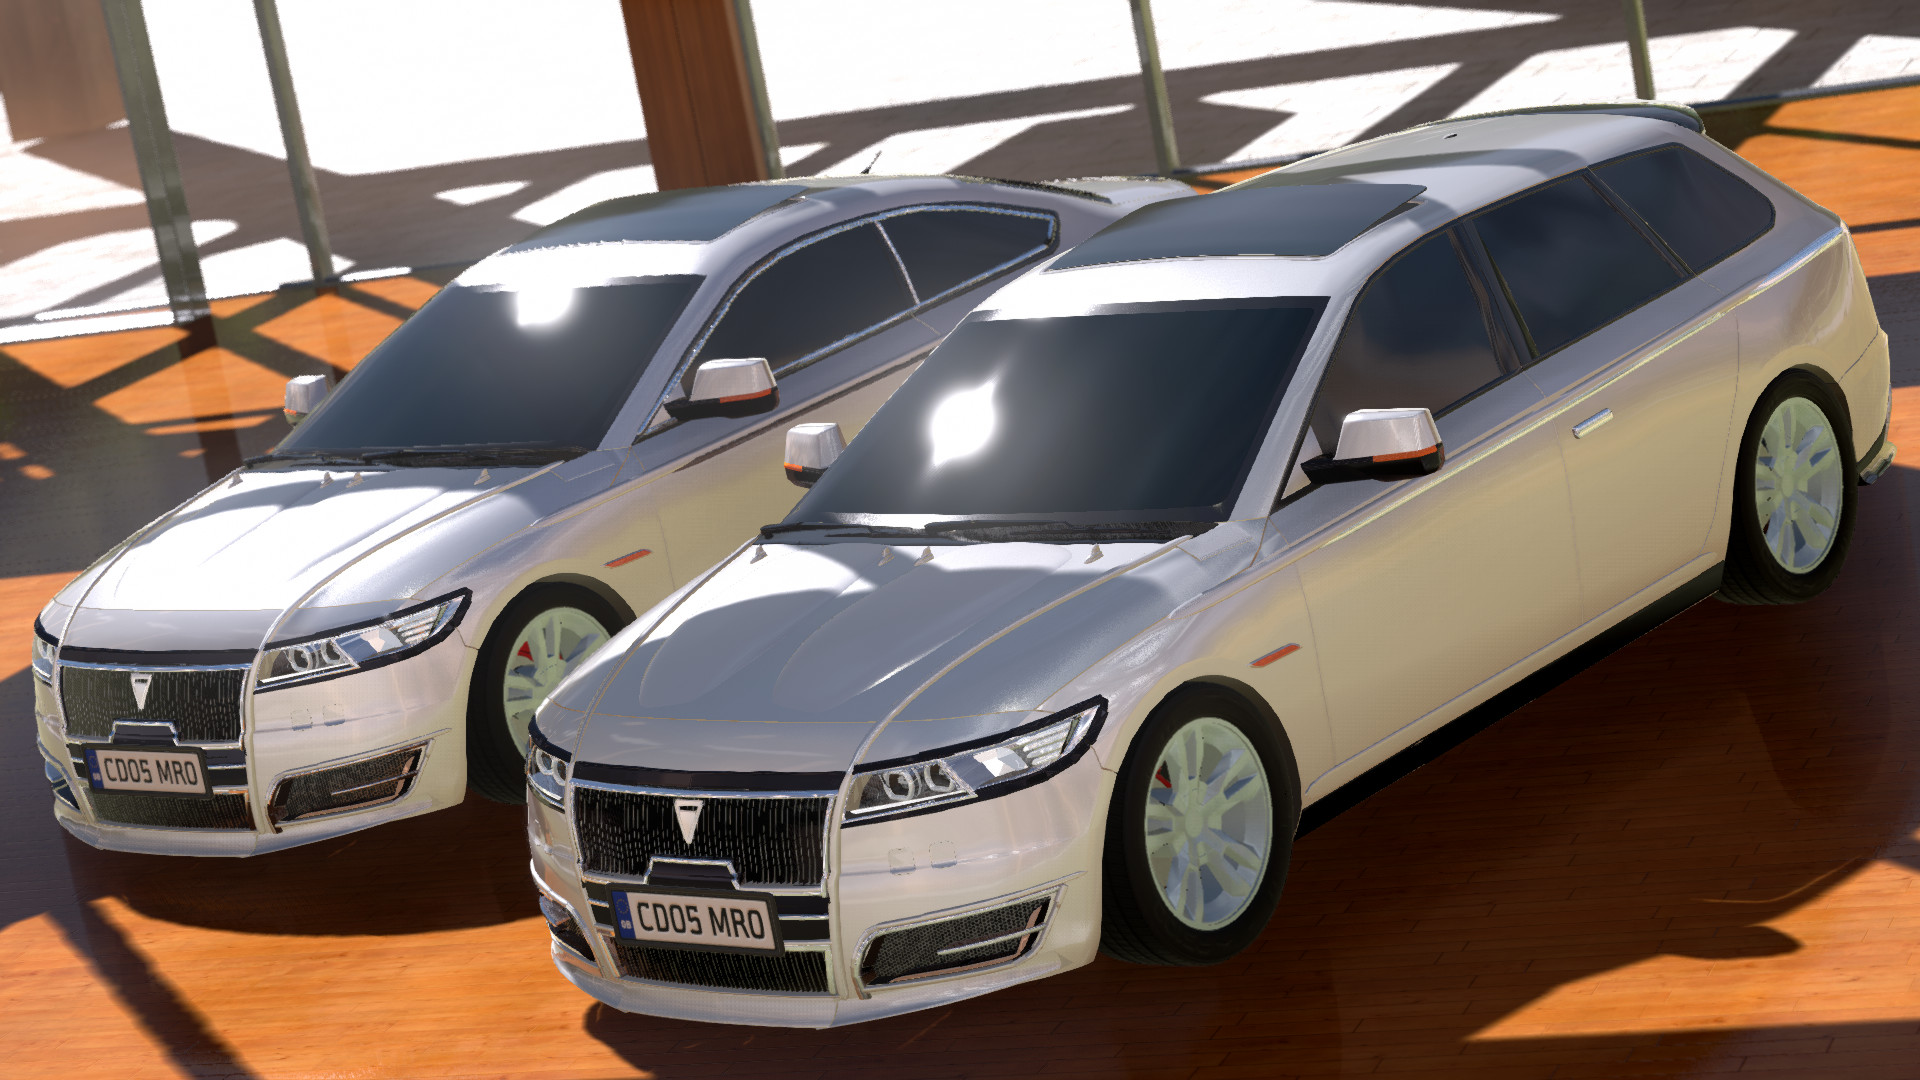 Automation - The Car Company Tycoon Game screenshot